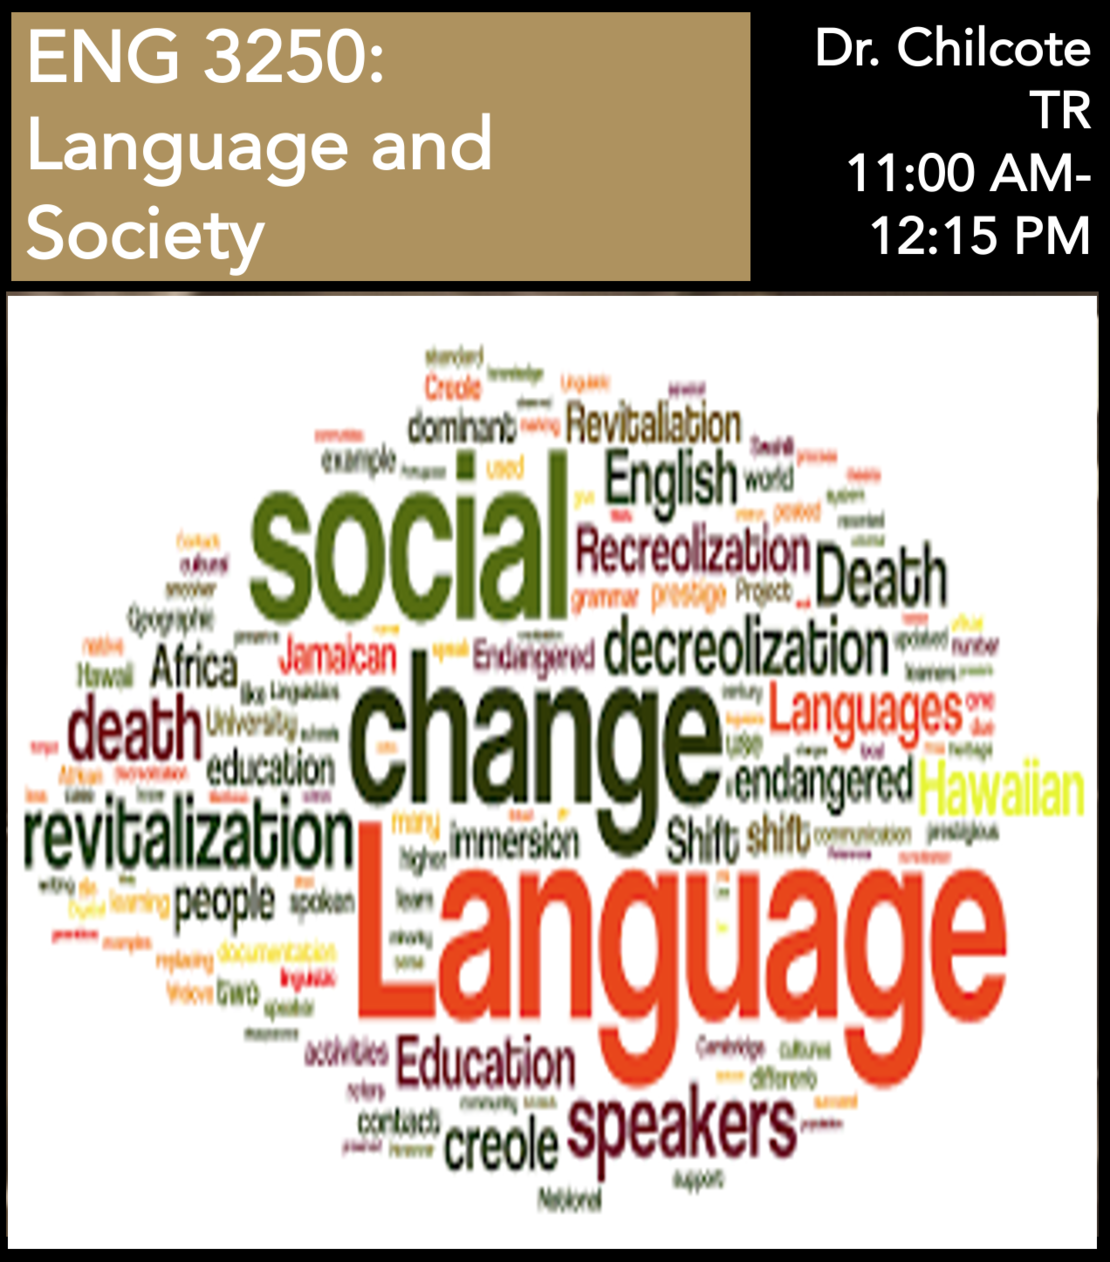 ENG 3250 Language and Society Dr. Chilcote TR 11:00 AM-12:15 PM